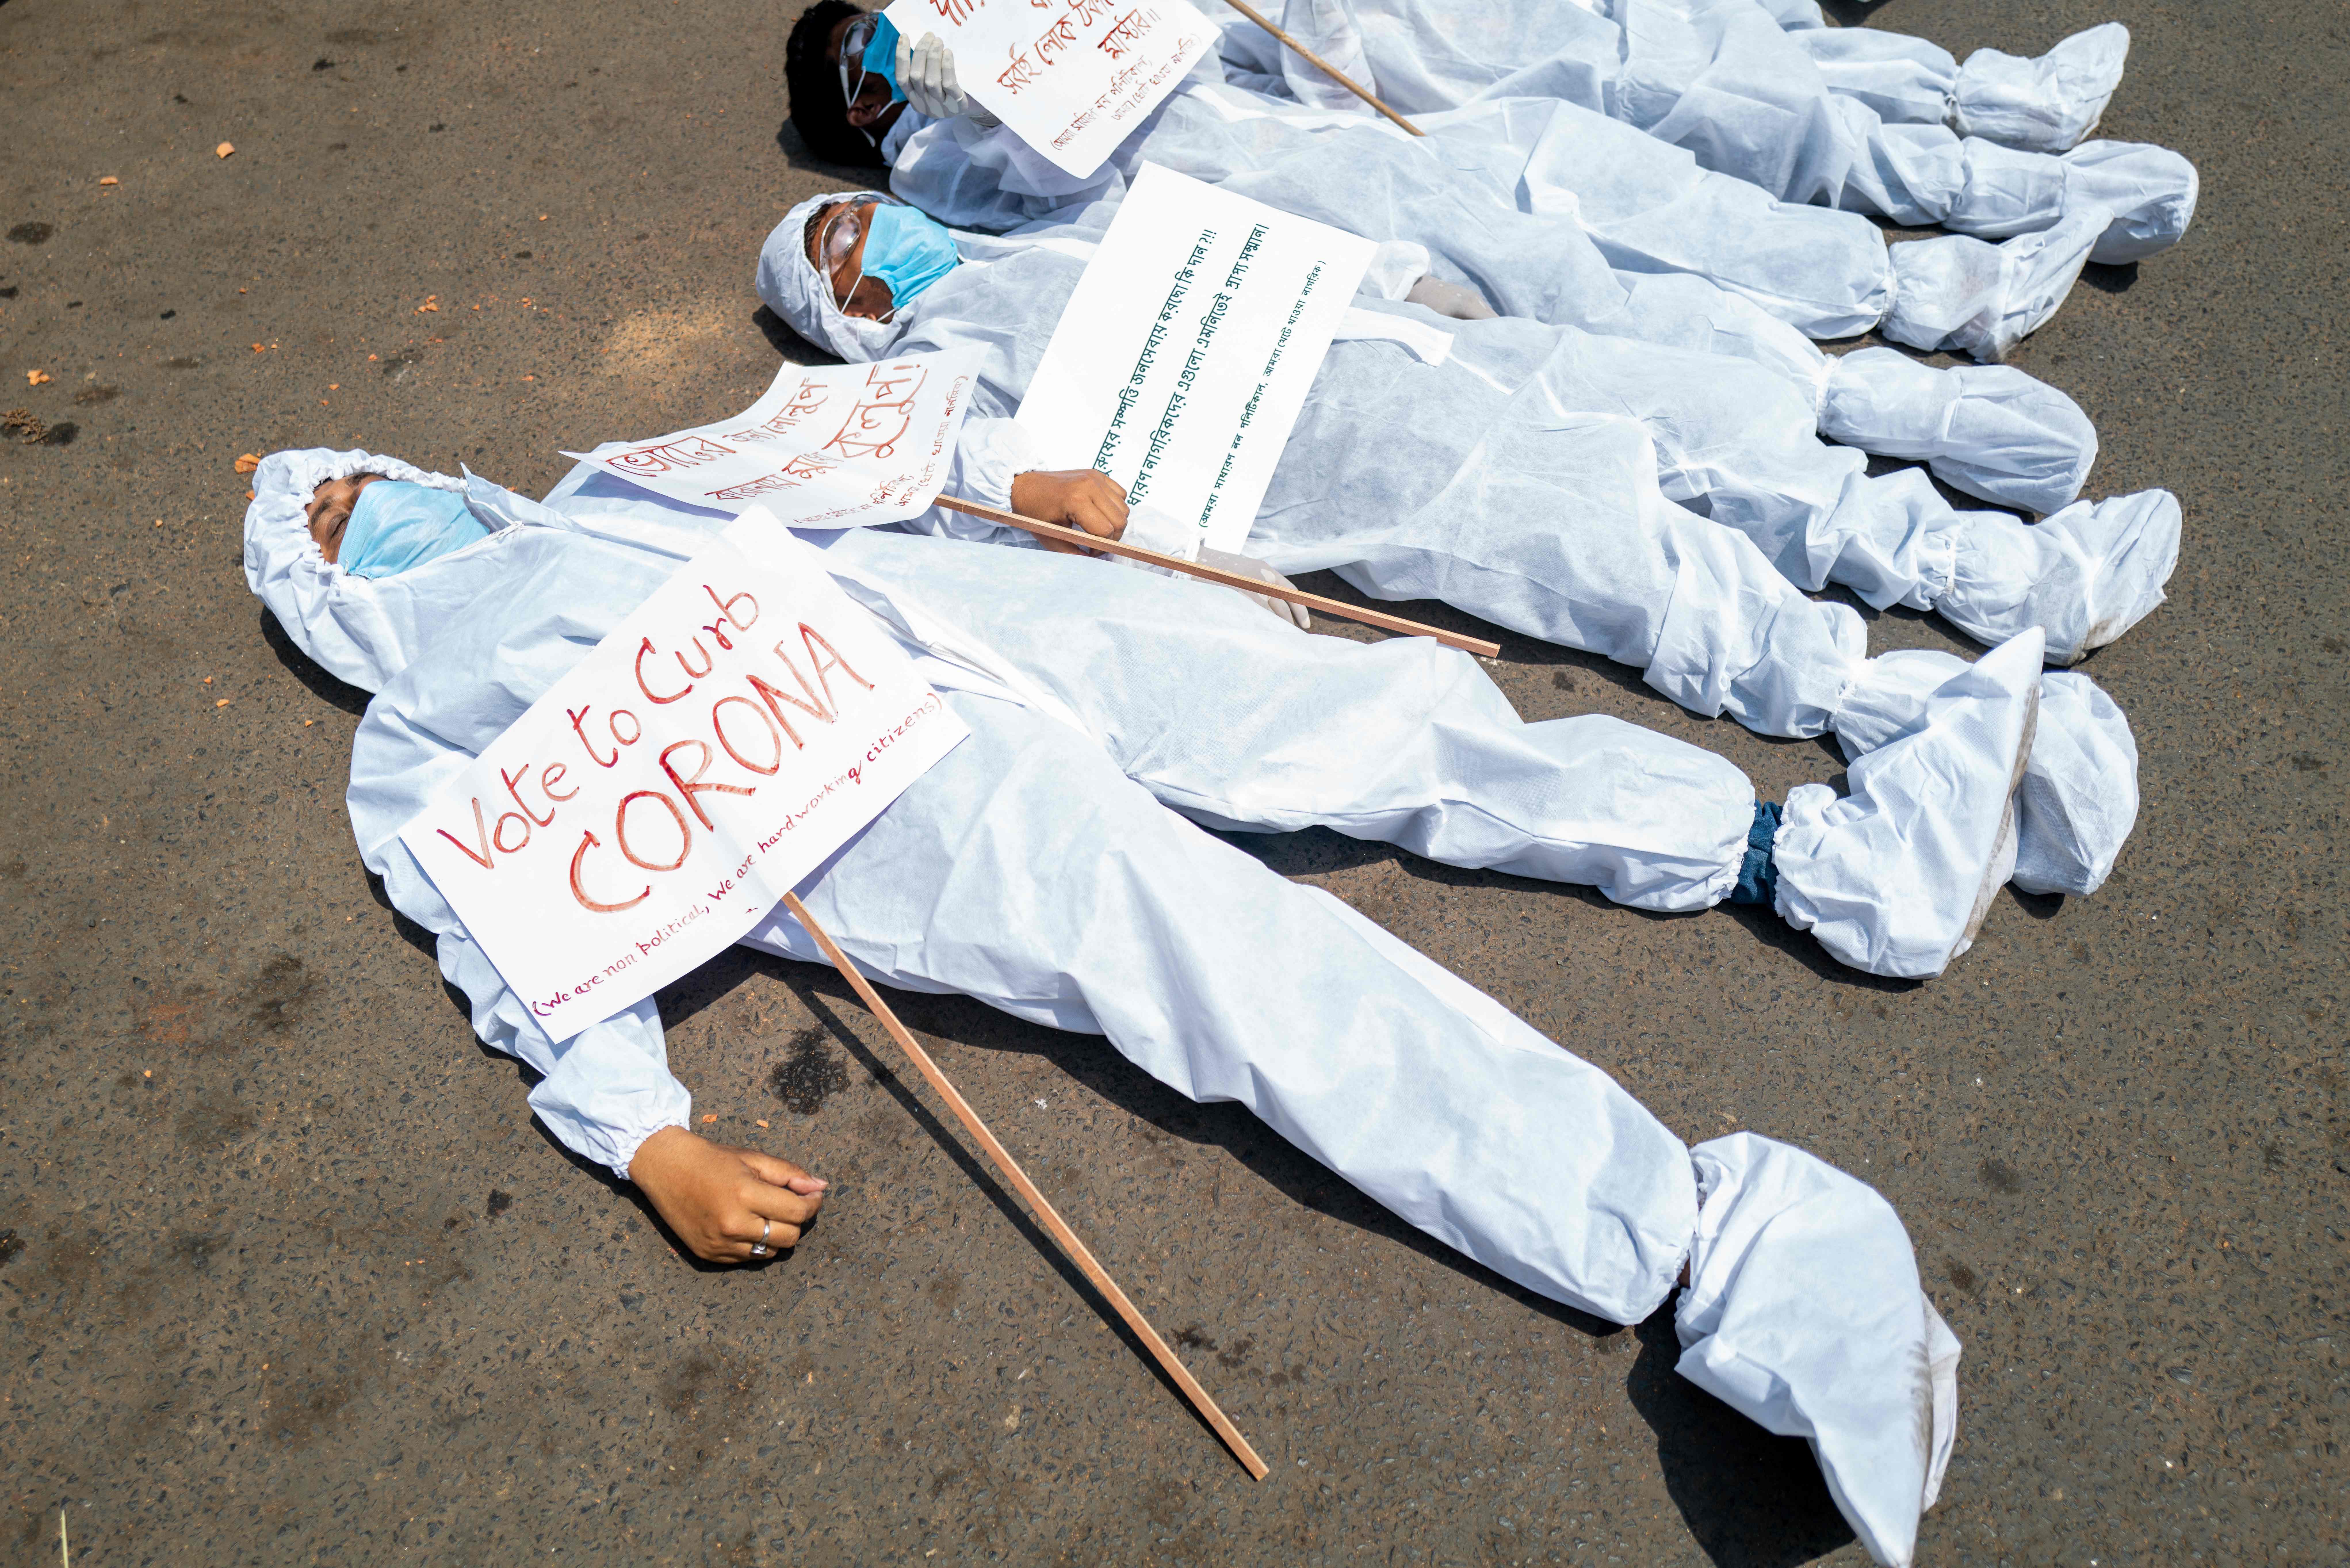 Protesters wearing protective suits and masks display placards laying on the street near the Election Commission office in Kolkata earlier this month